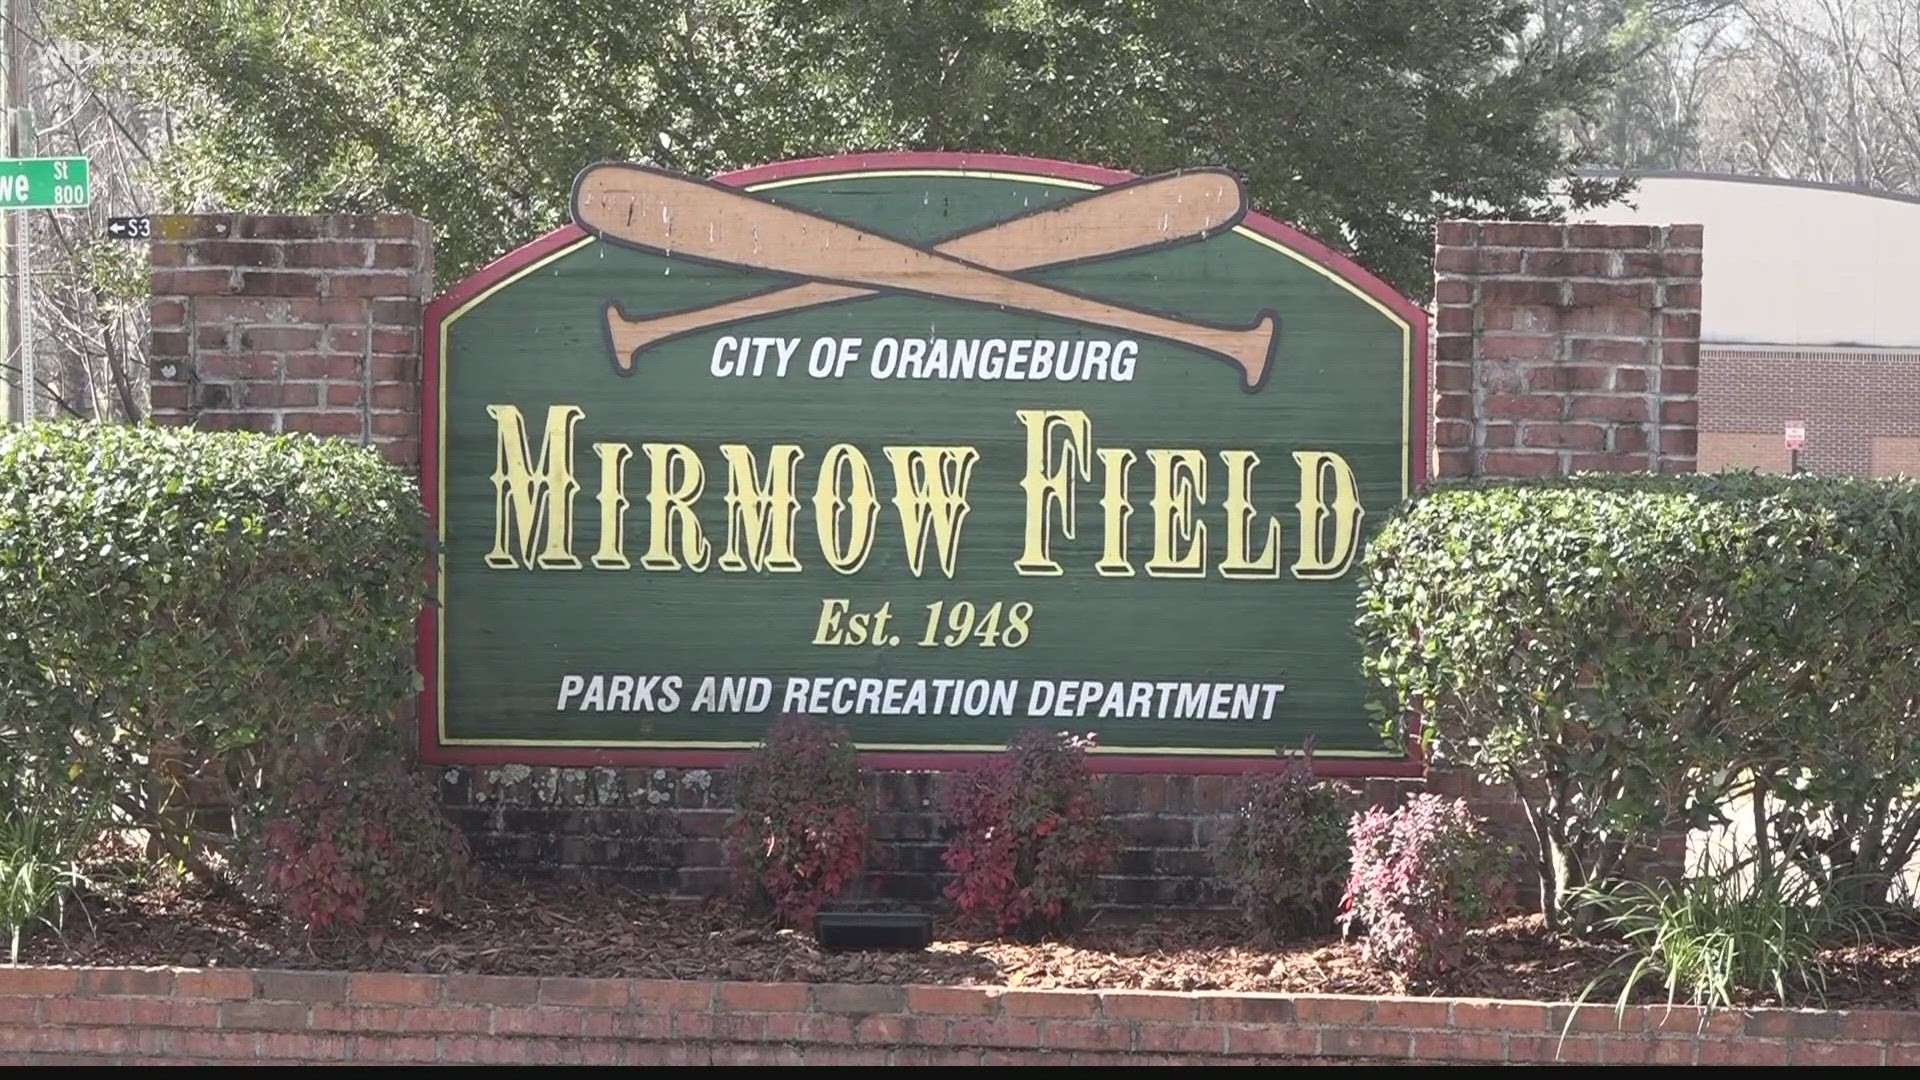 The historic Mirmow field in Orangeburg has been home to baseball games for the last 75 years is getting some upgrades.